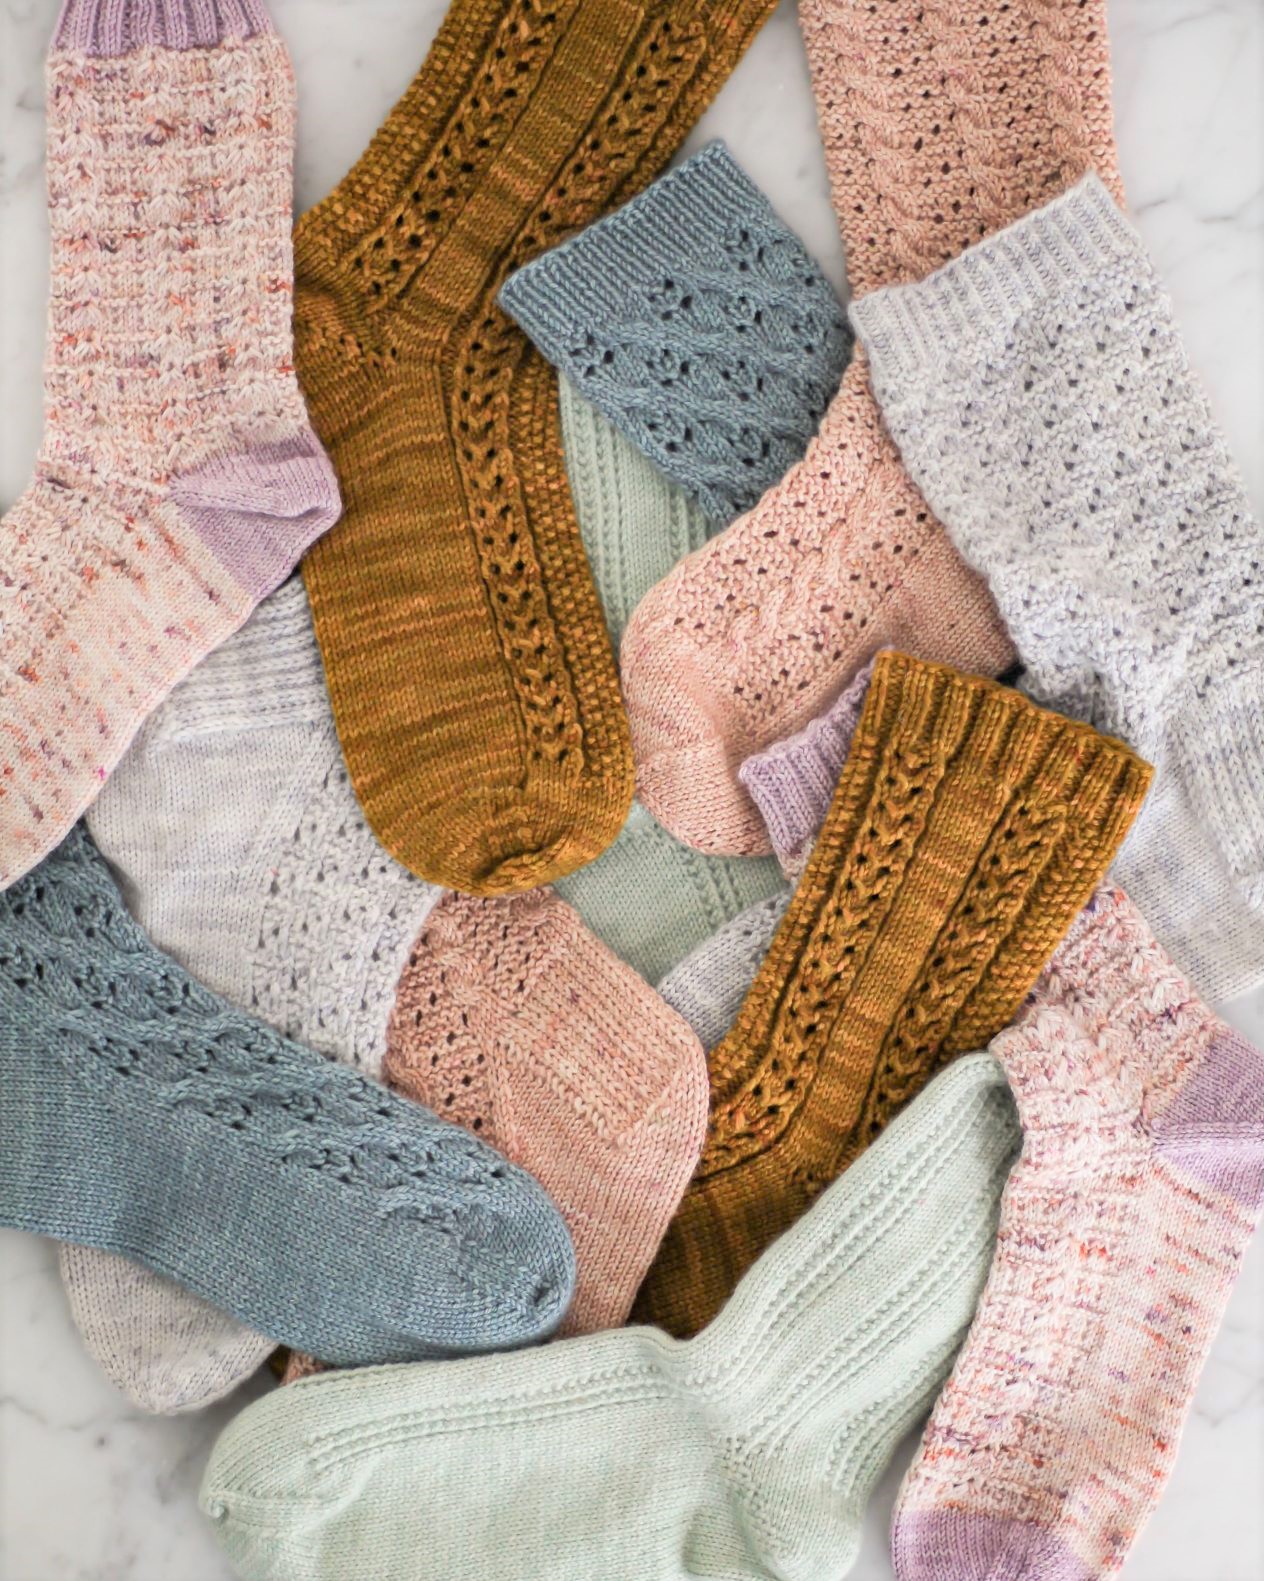 How To Use Up Leftover Sock Yarn (Free Knitting Pattern)